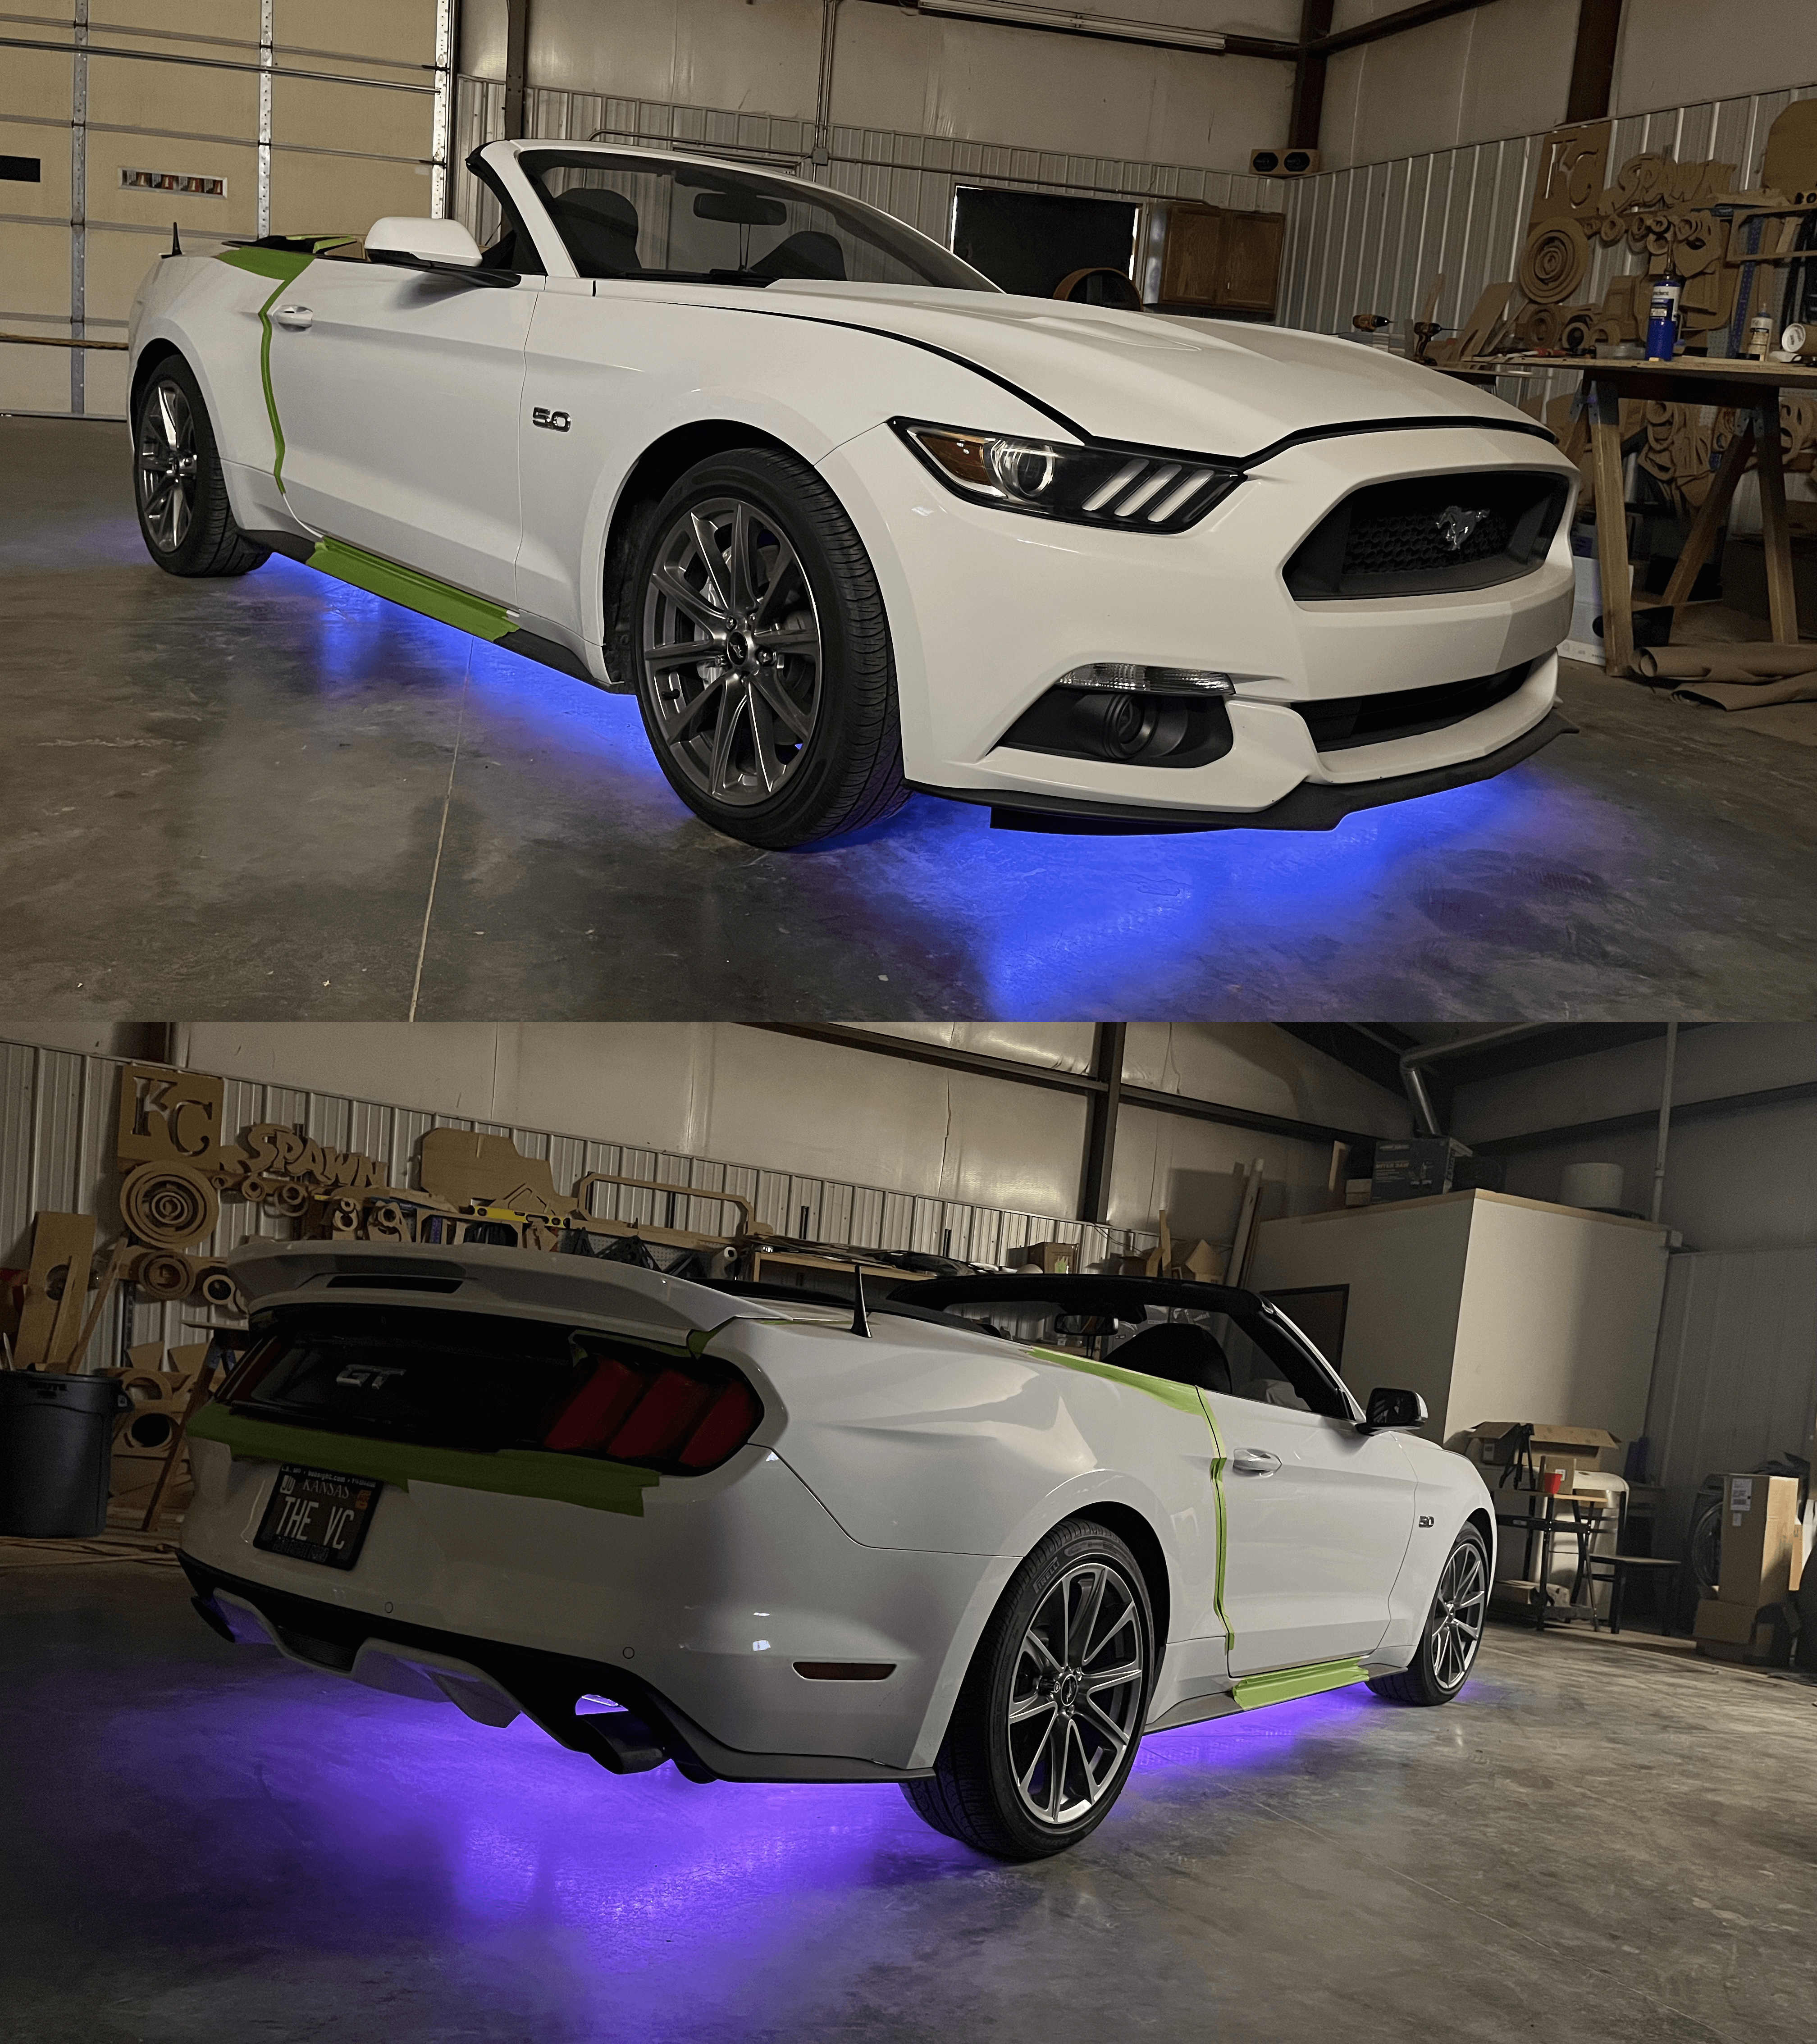 LED Underglow Lights on Mustang